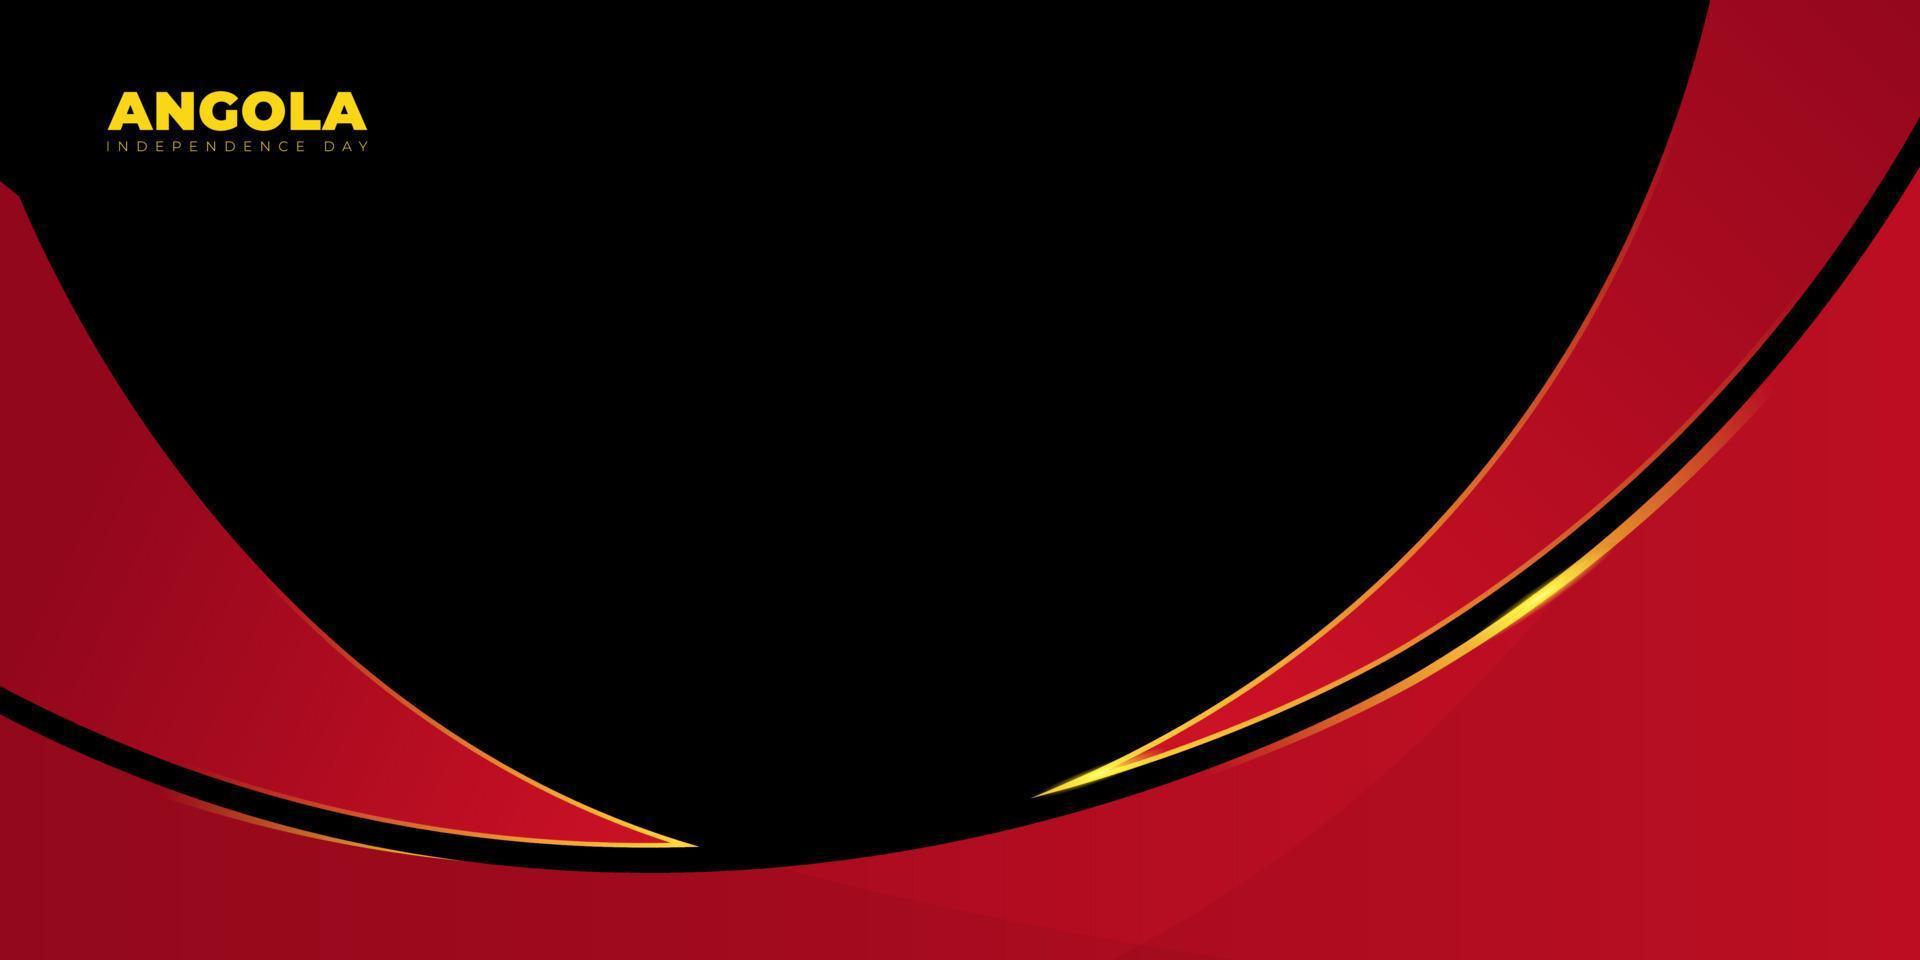 Red and black Abstract design with black background. Angola Independence day background. vector